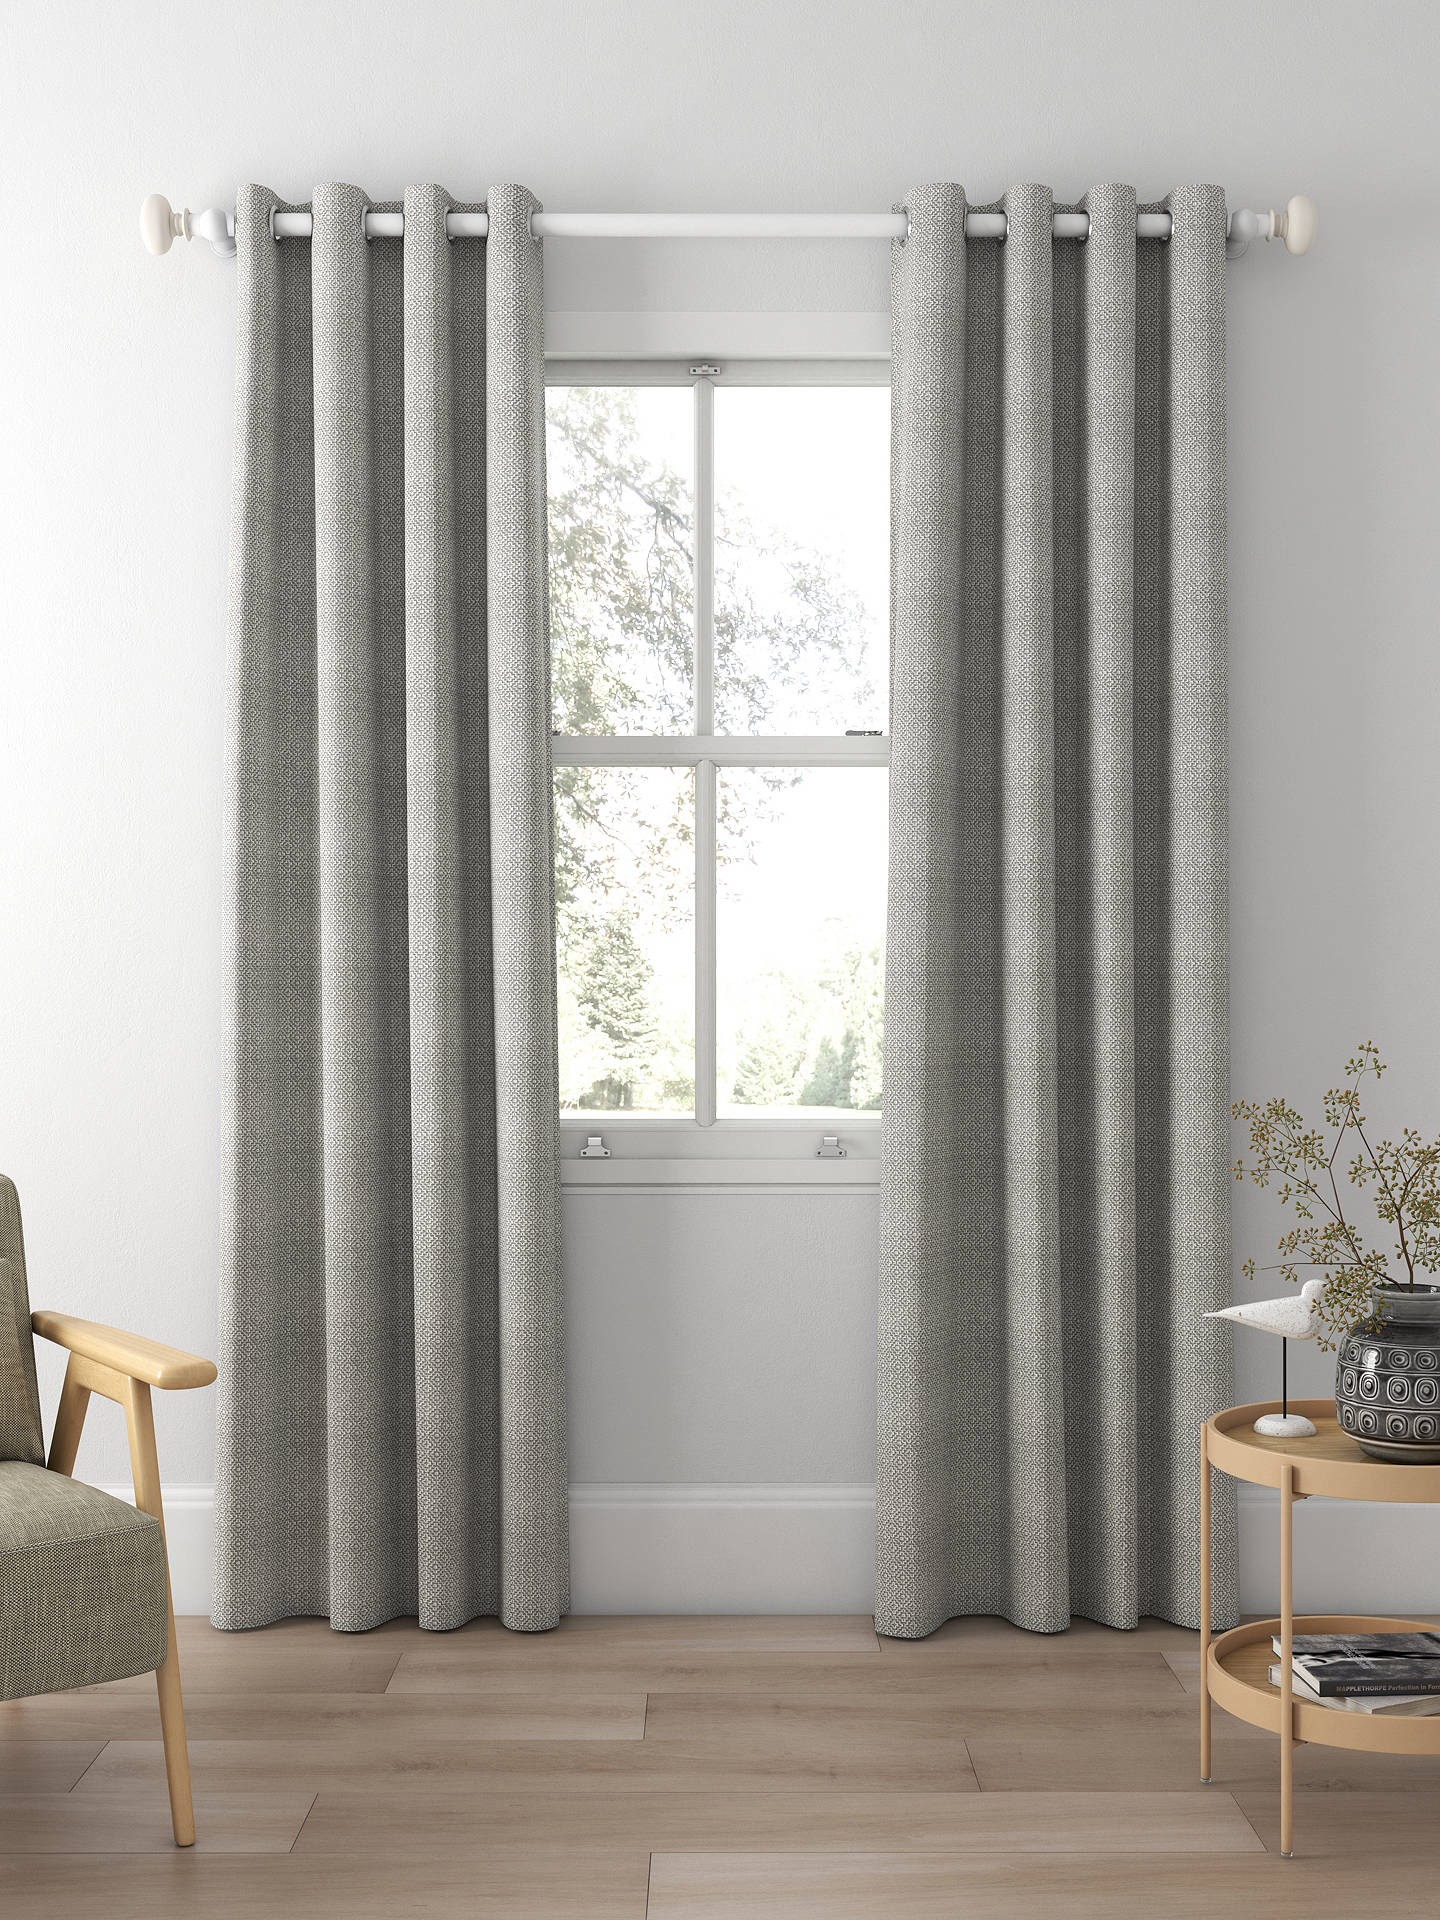 Sanderson Linden Made to Measure Curtains, Dove